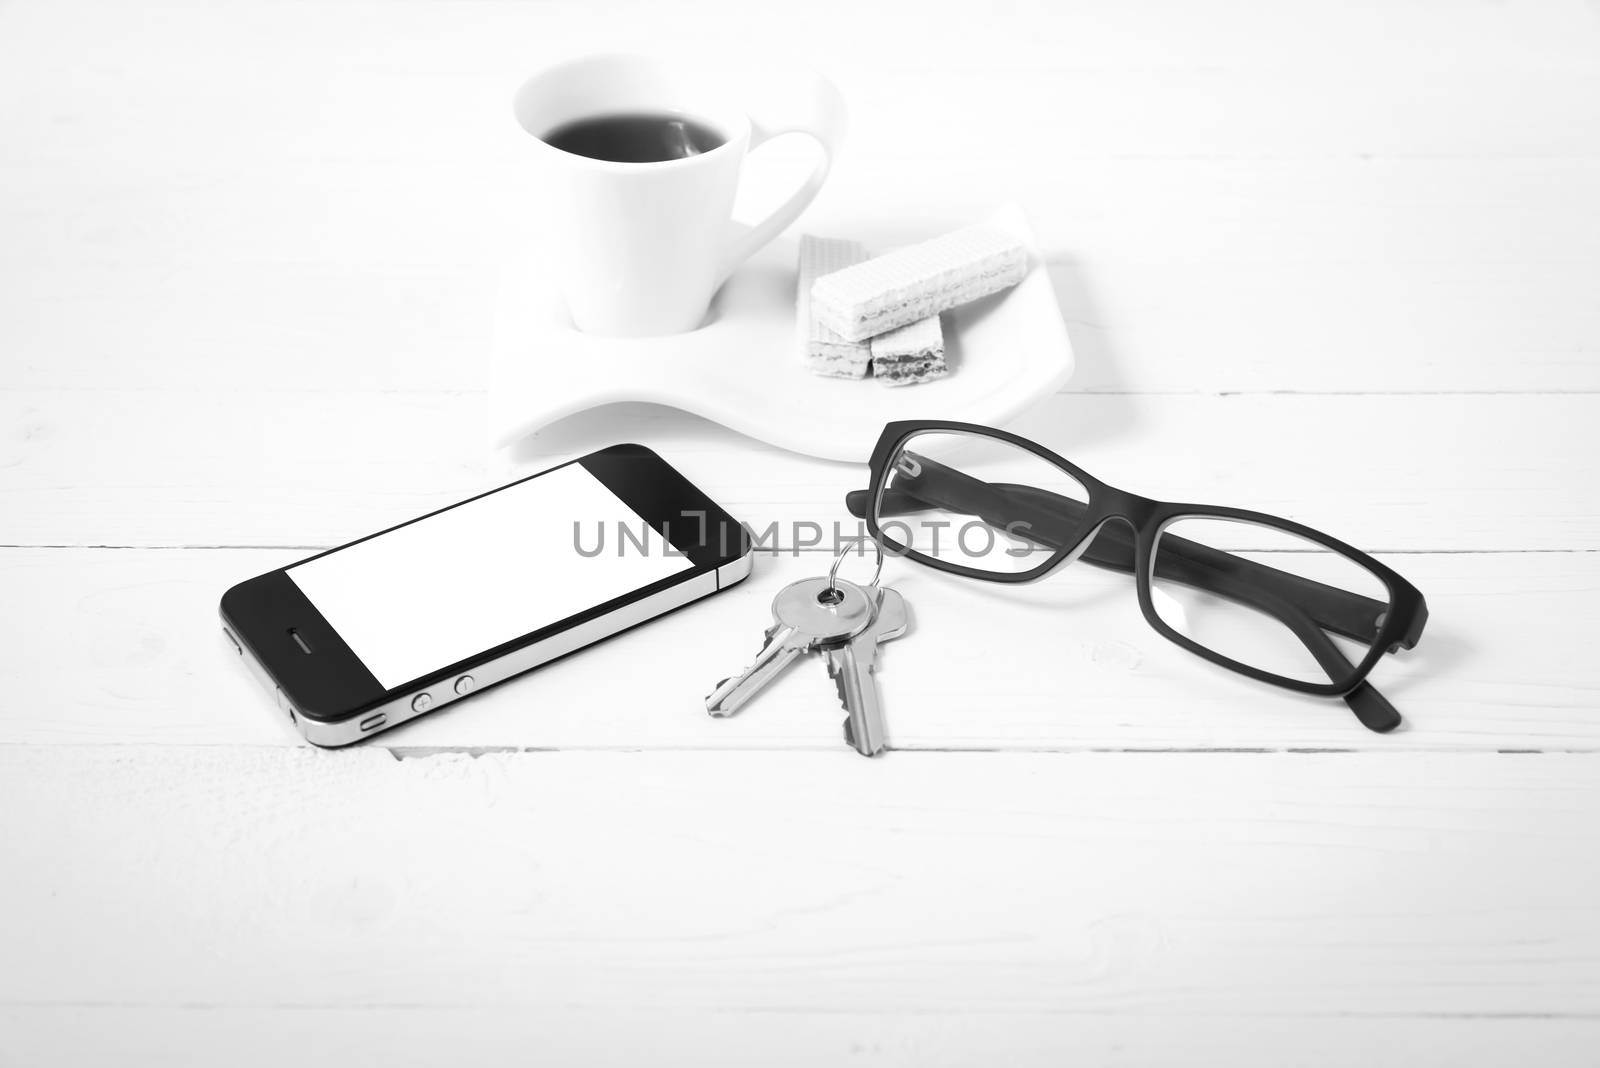 coffee cup with wafer,phone,key,eyeglasses on white wood background black and white color